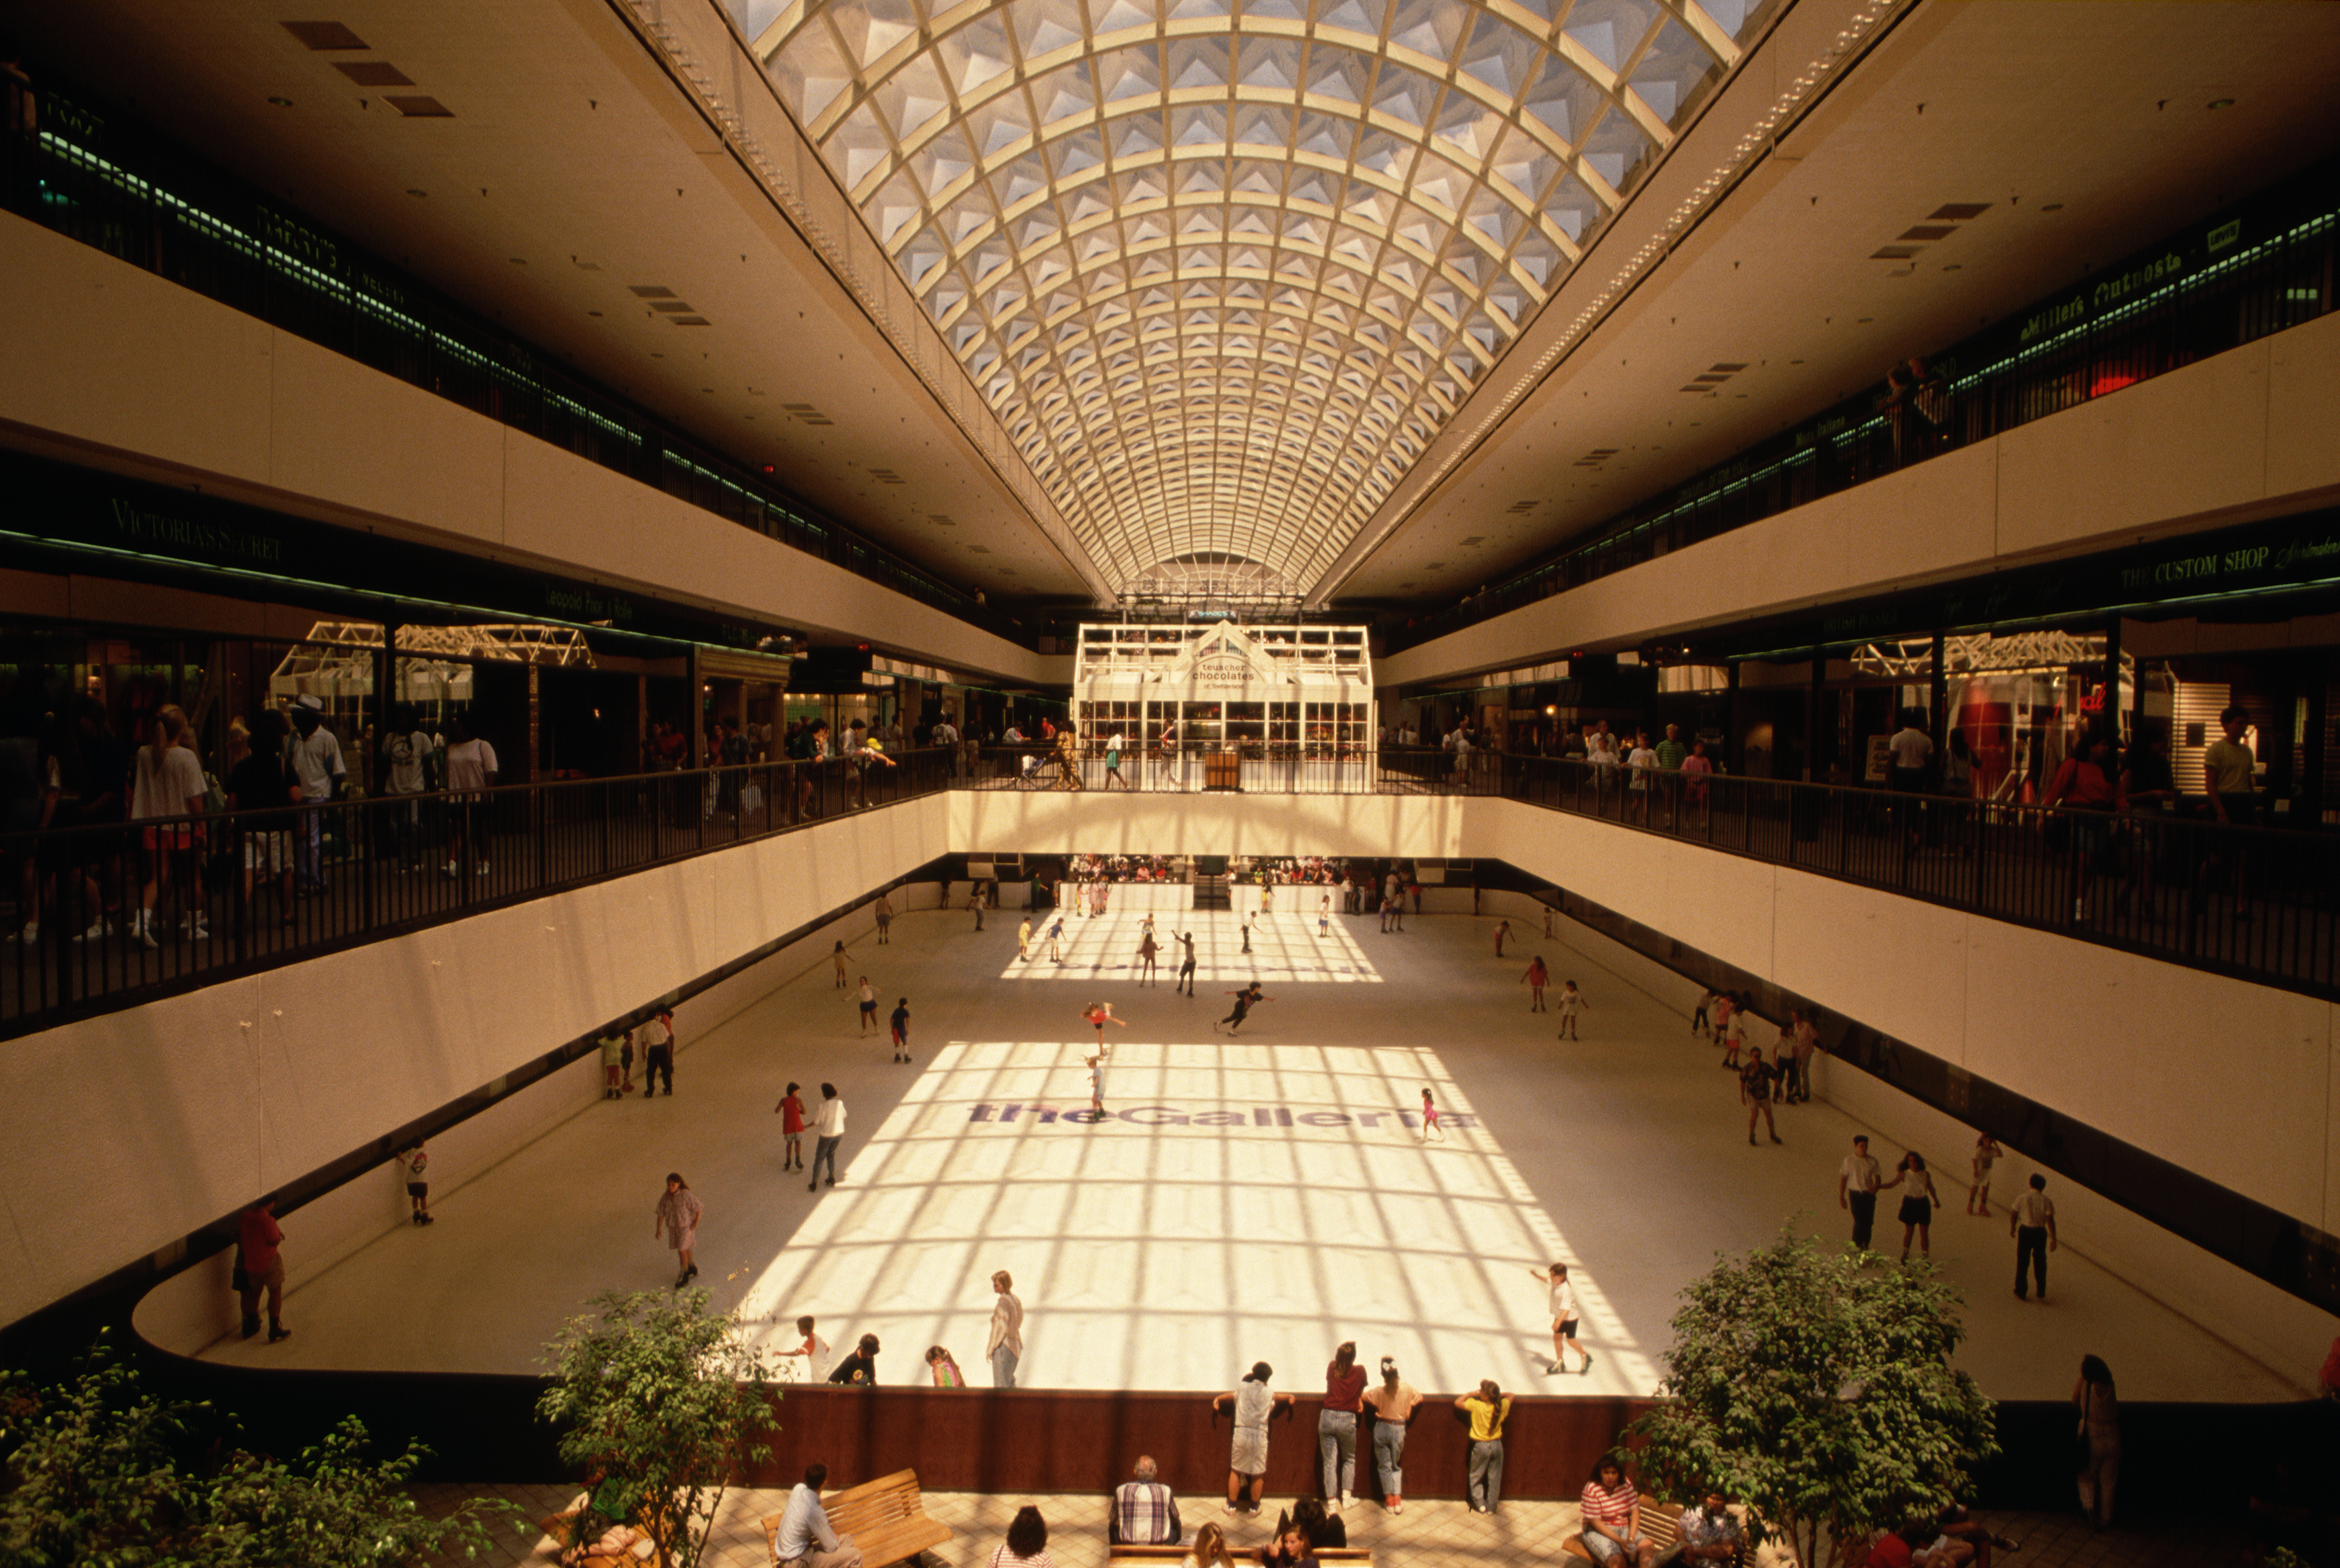 The Mall isn't dead yet: here's how to save it